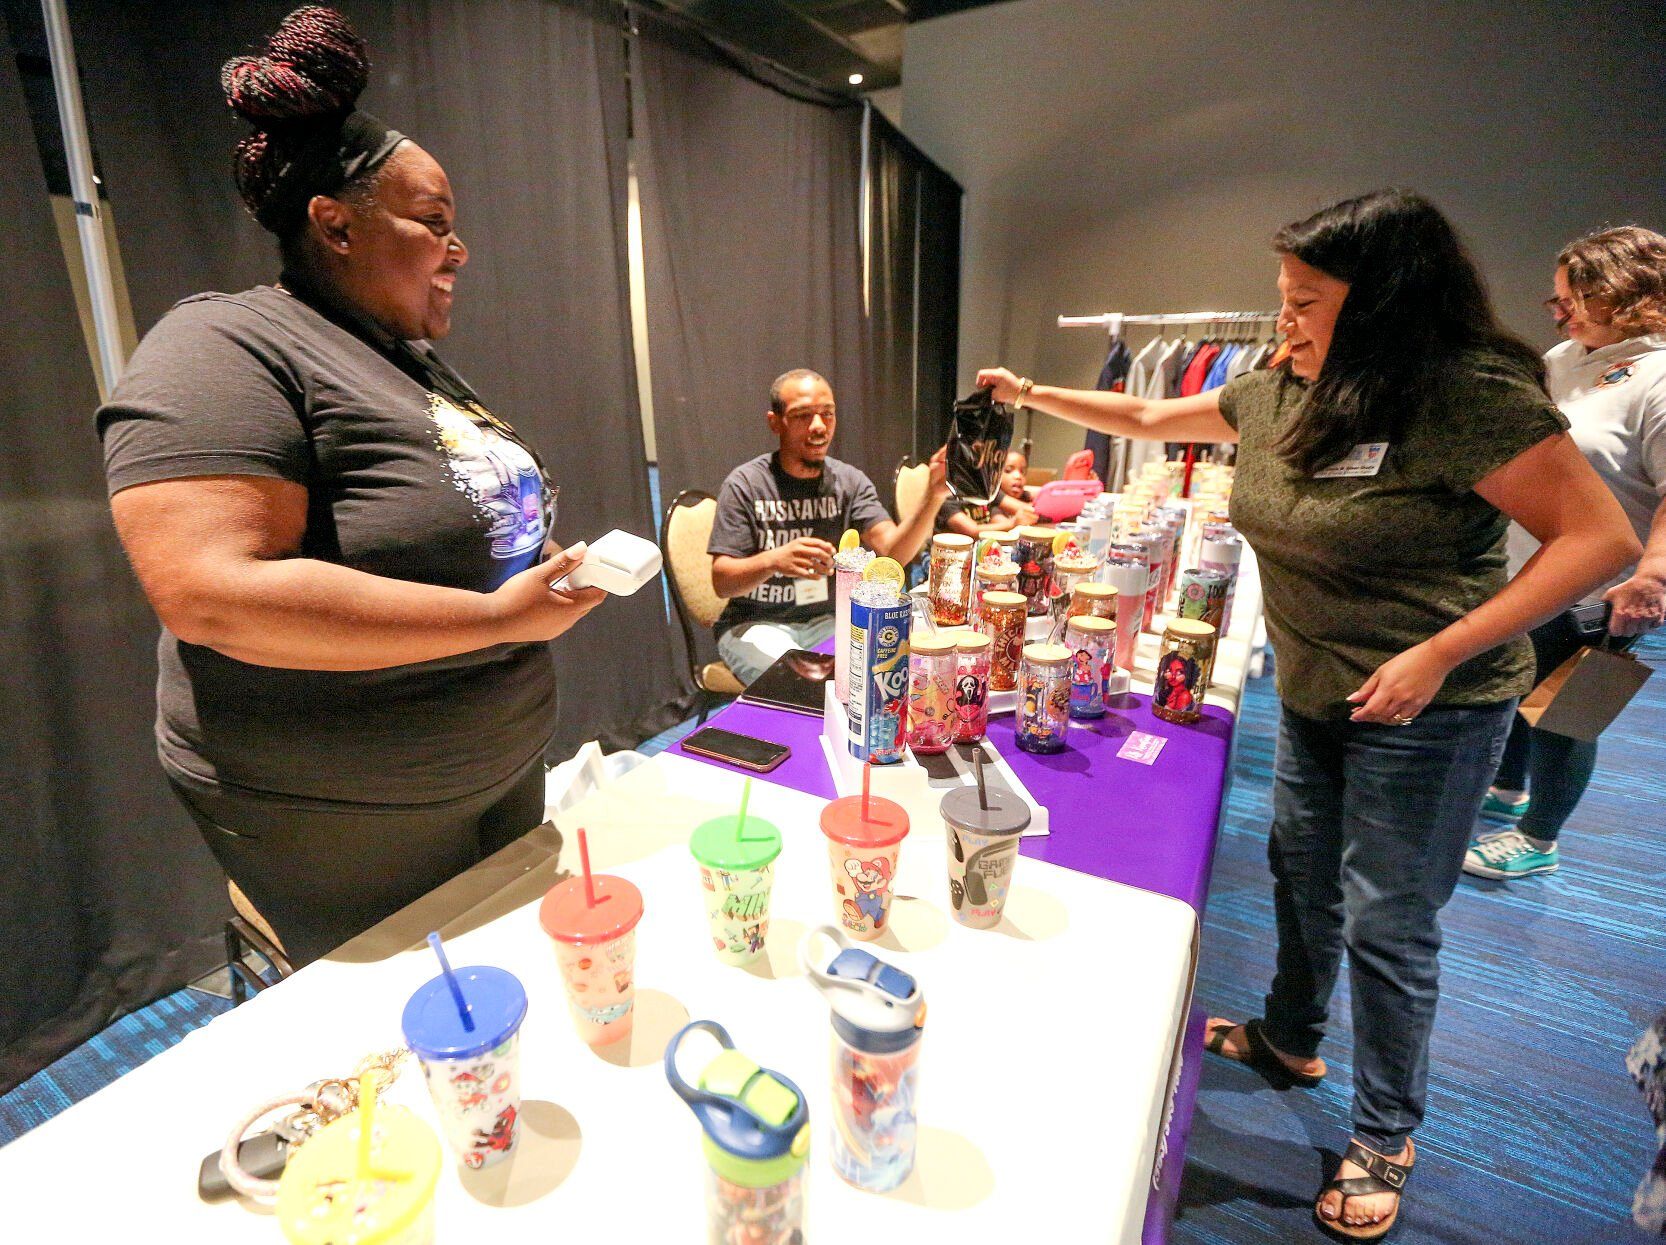 Chief of Equity and Human Rights for the City of Dubuque, Dr. Gisella Aitken-Shadle (right), talks with Tika Sykes, owner of KLS Kreation, during the third annual Black Business Expo held at the Q Casino.    PHOTO CREDIT: Dave Kettering